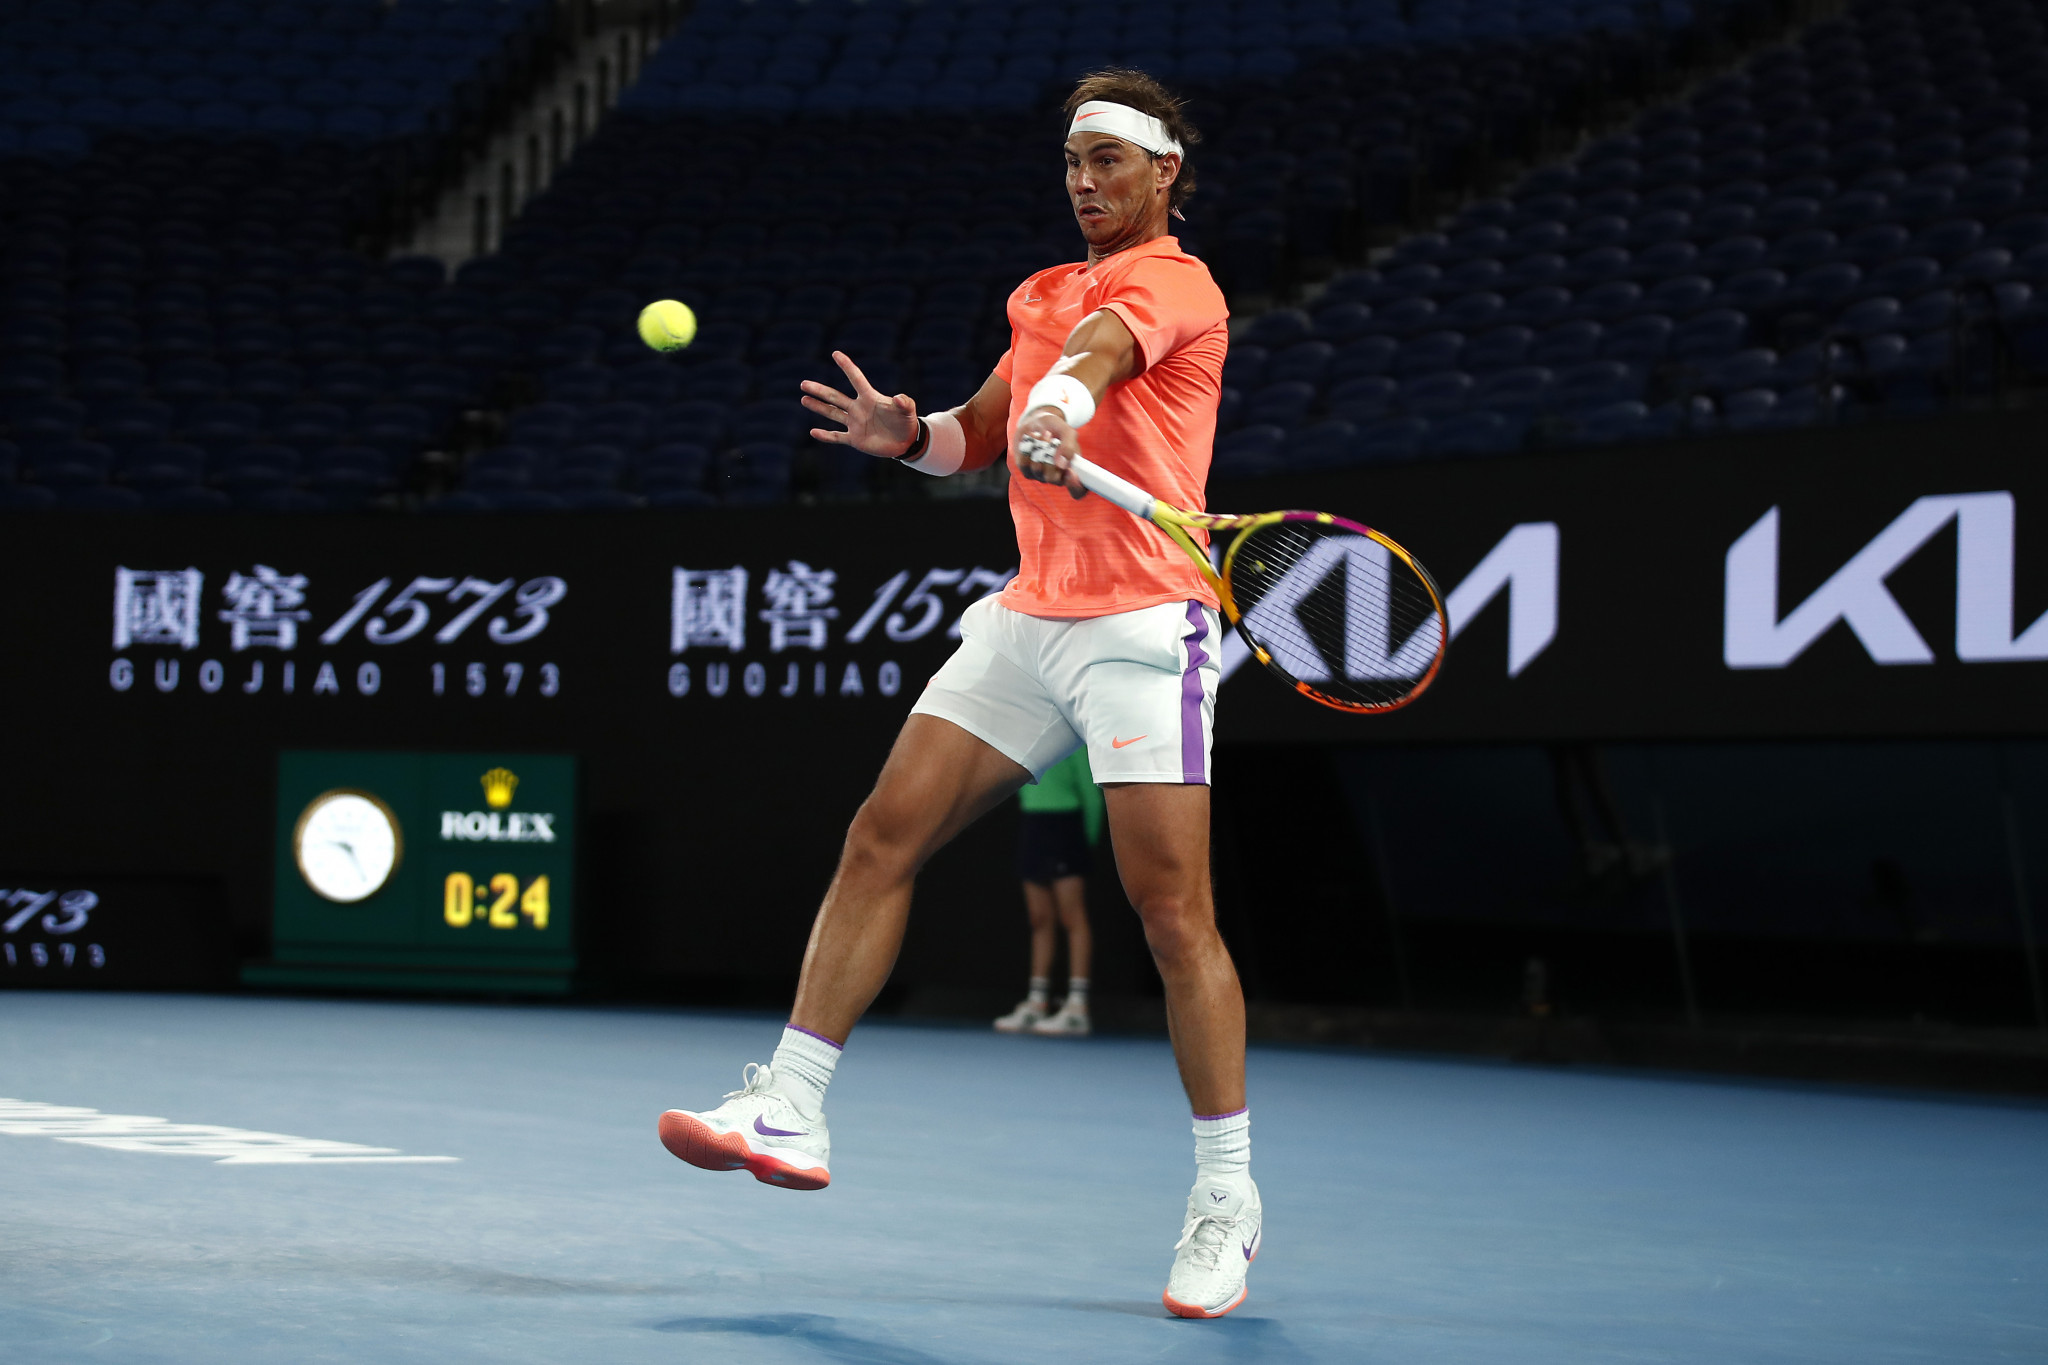 No fans were allowed at the Australian Open as Spanish star Rafael Nadal beat Cameron Norrie of Britain at an empty Rod Laver Arena ©Getty Images